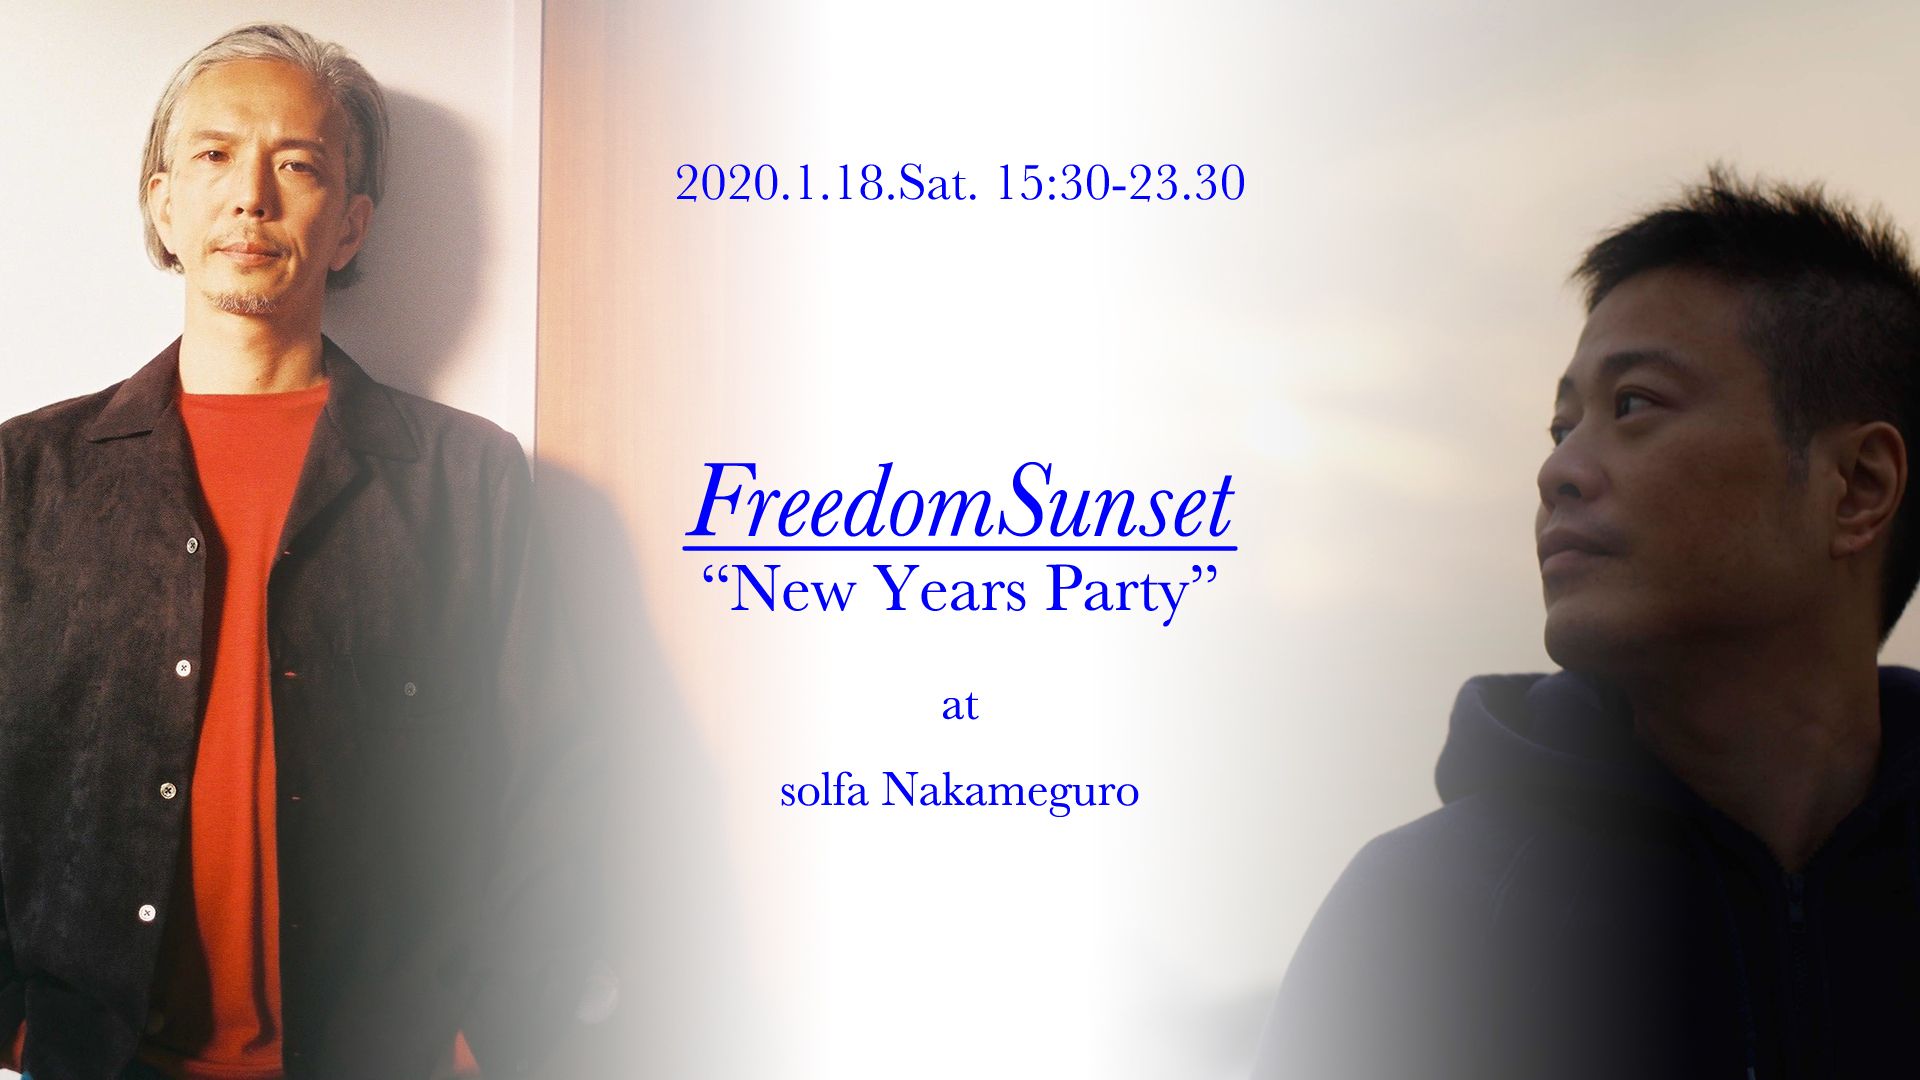 FreedomSunset ”New Years Party”